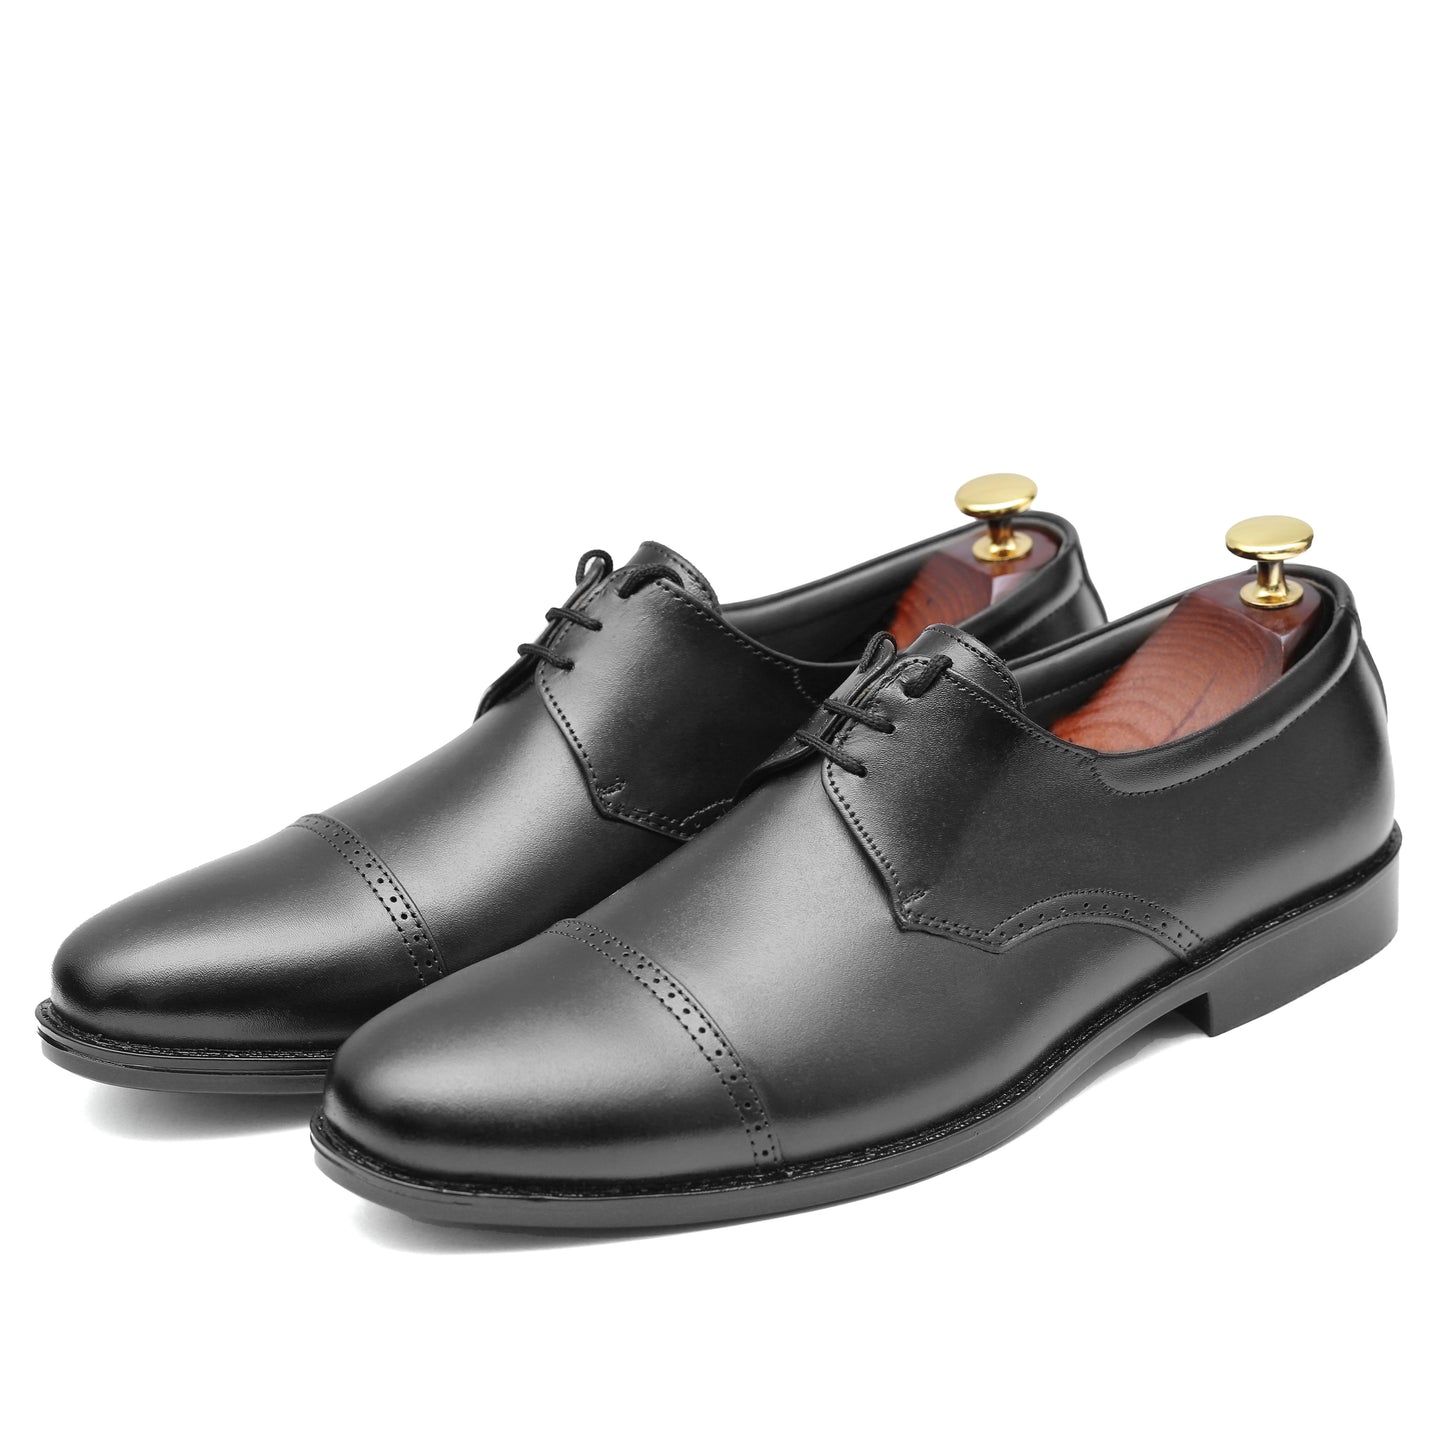 FORMAL BLACK OXFORD LEATHER SHOES